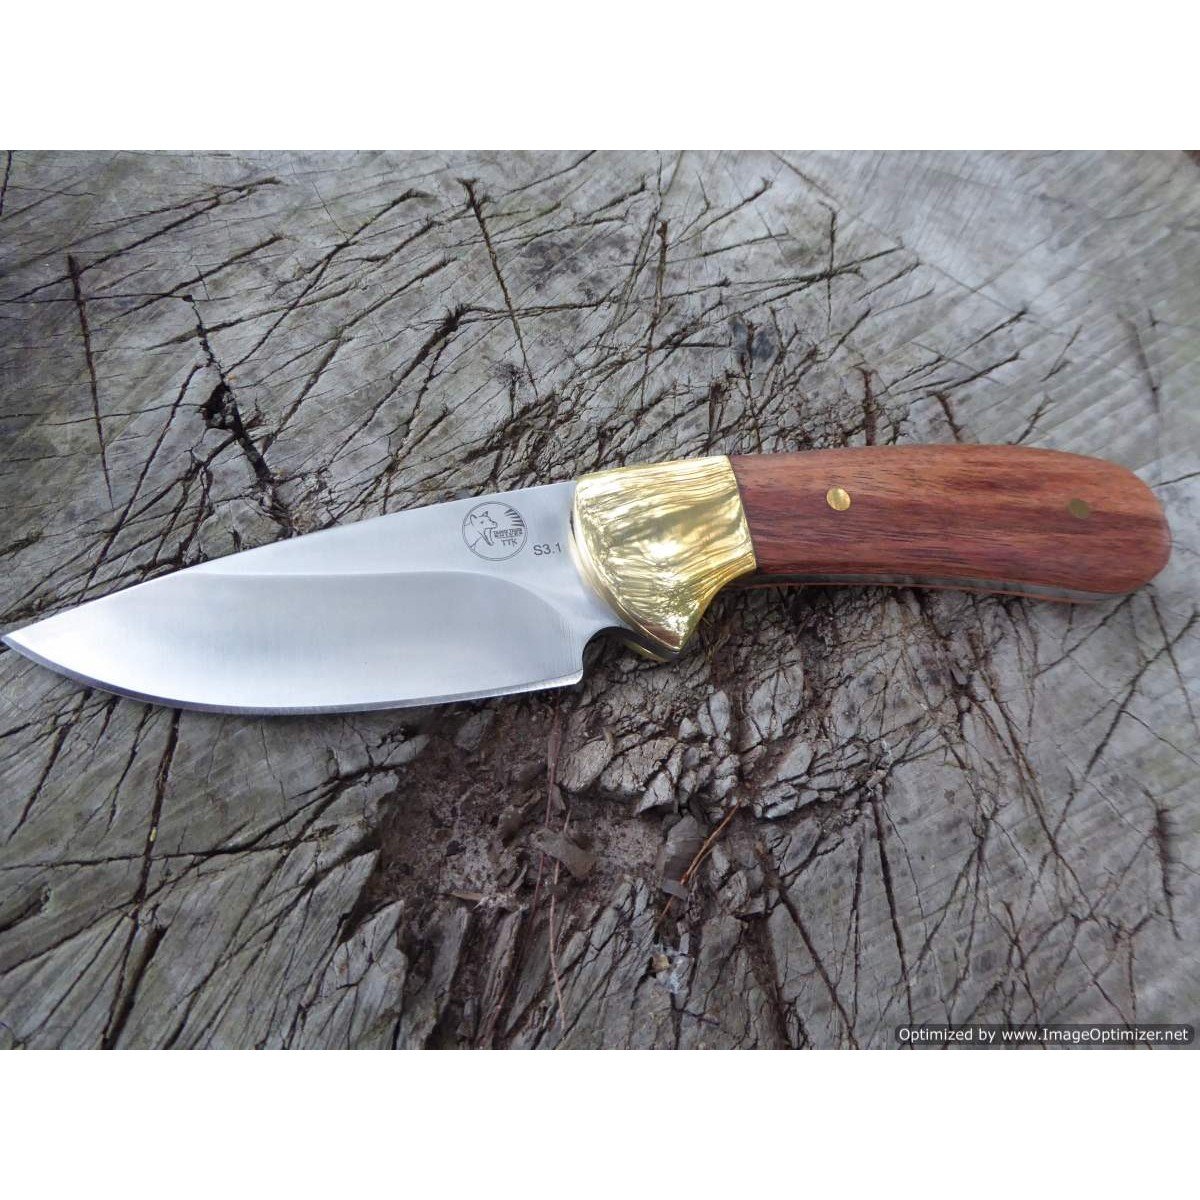 Tassie Tiger Knives – 3.1Skinning knife with Leather Sheath